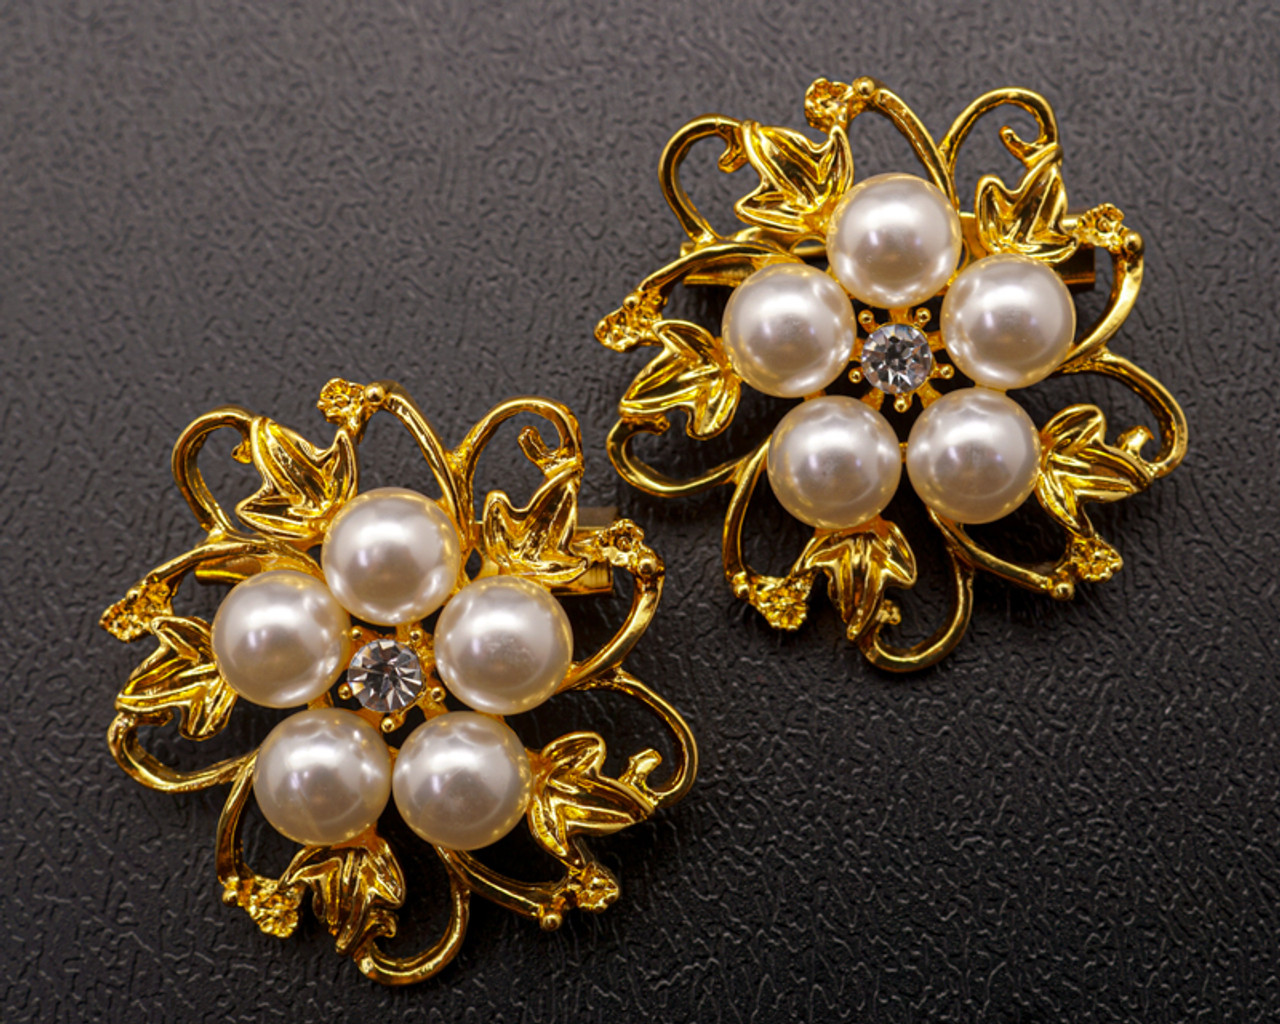 1 3/8 Yellow Gold Flower Brooch with White Pearls and Clear Rhinestone -  Pack of 12 - CB Flowers & Crafts